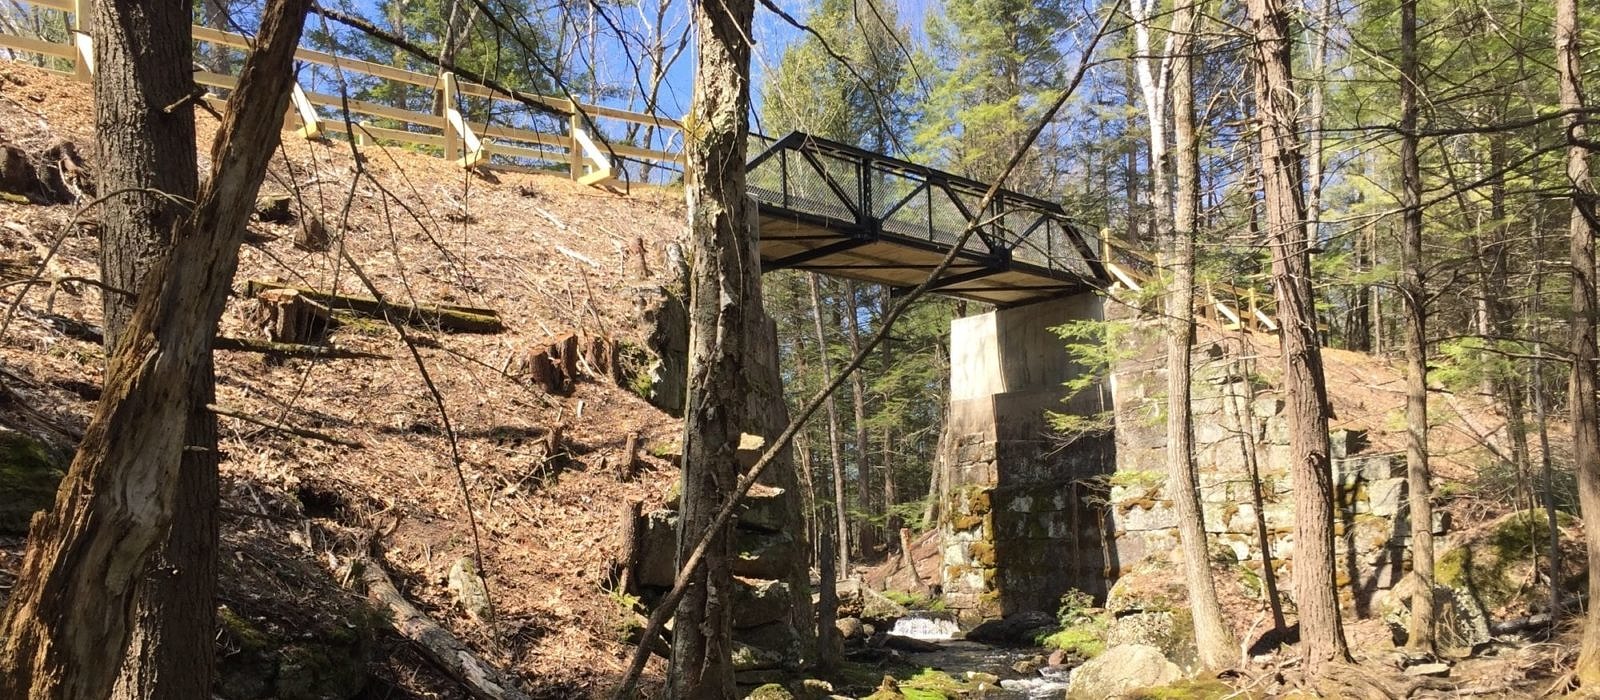 The newly installed historic steel truss bridge on the Jaquith Rail Trail (photo © James Newsom)